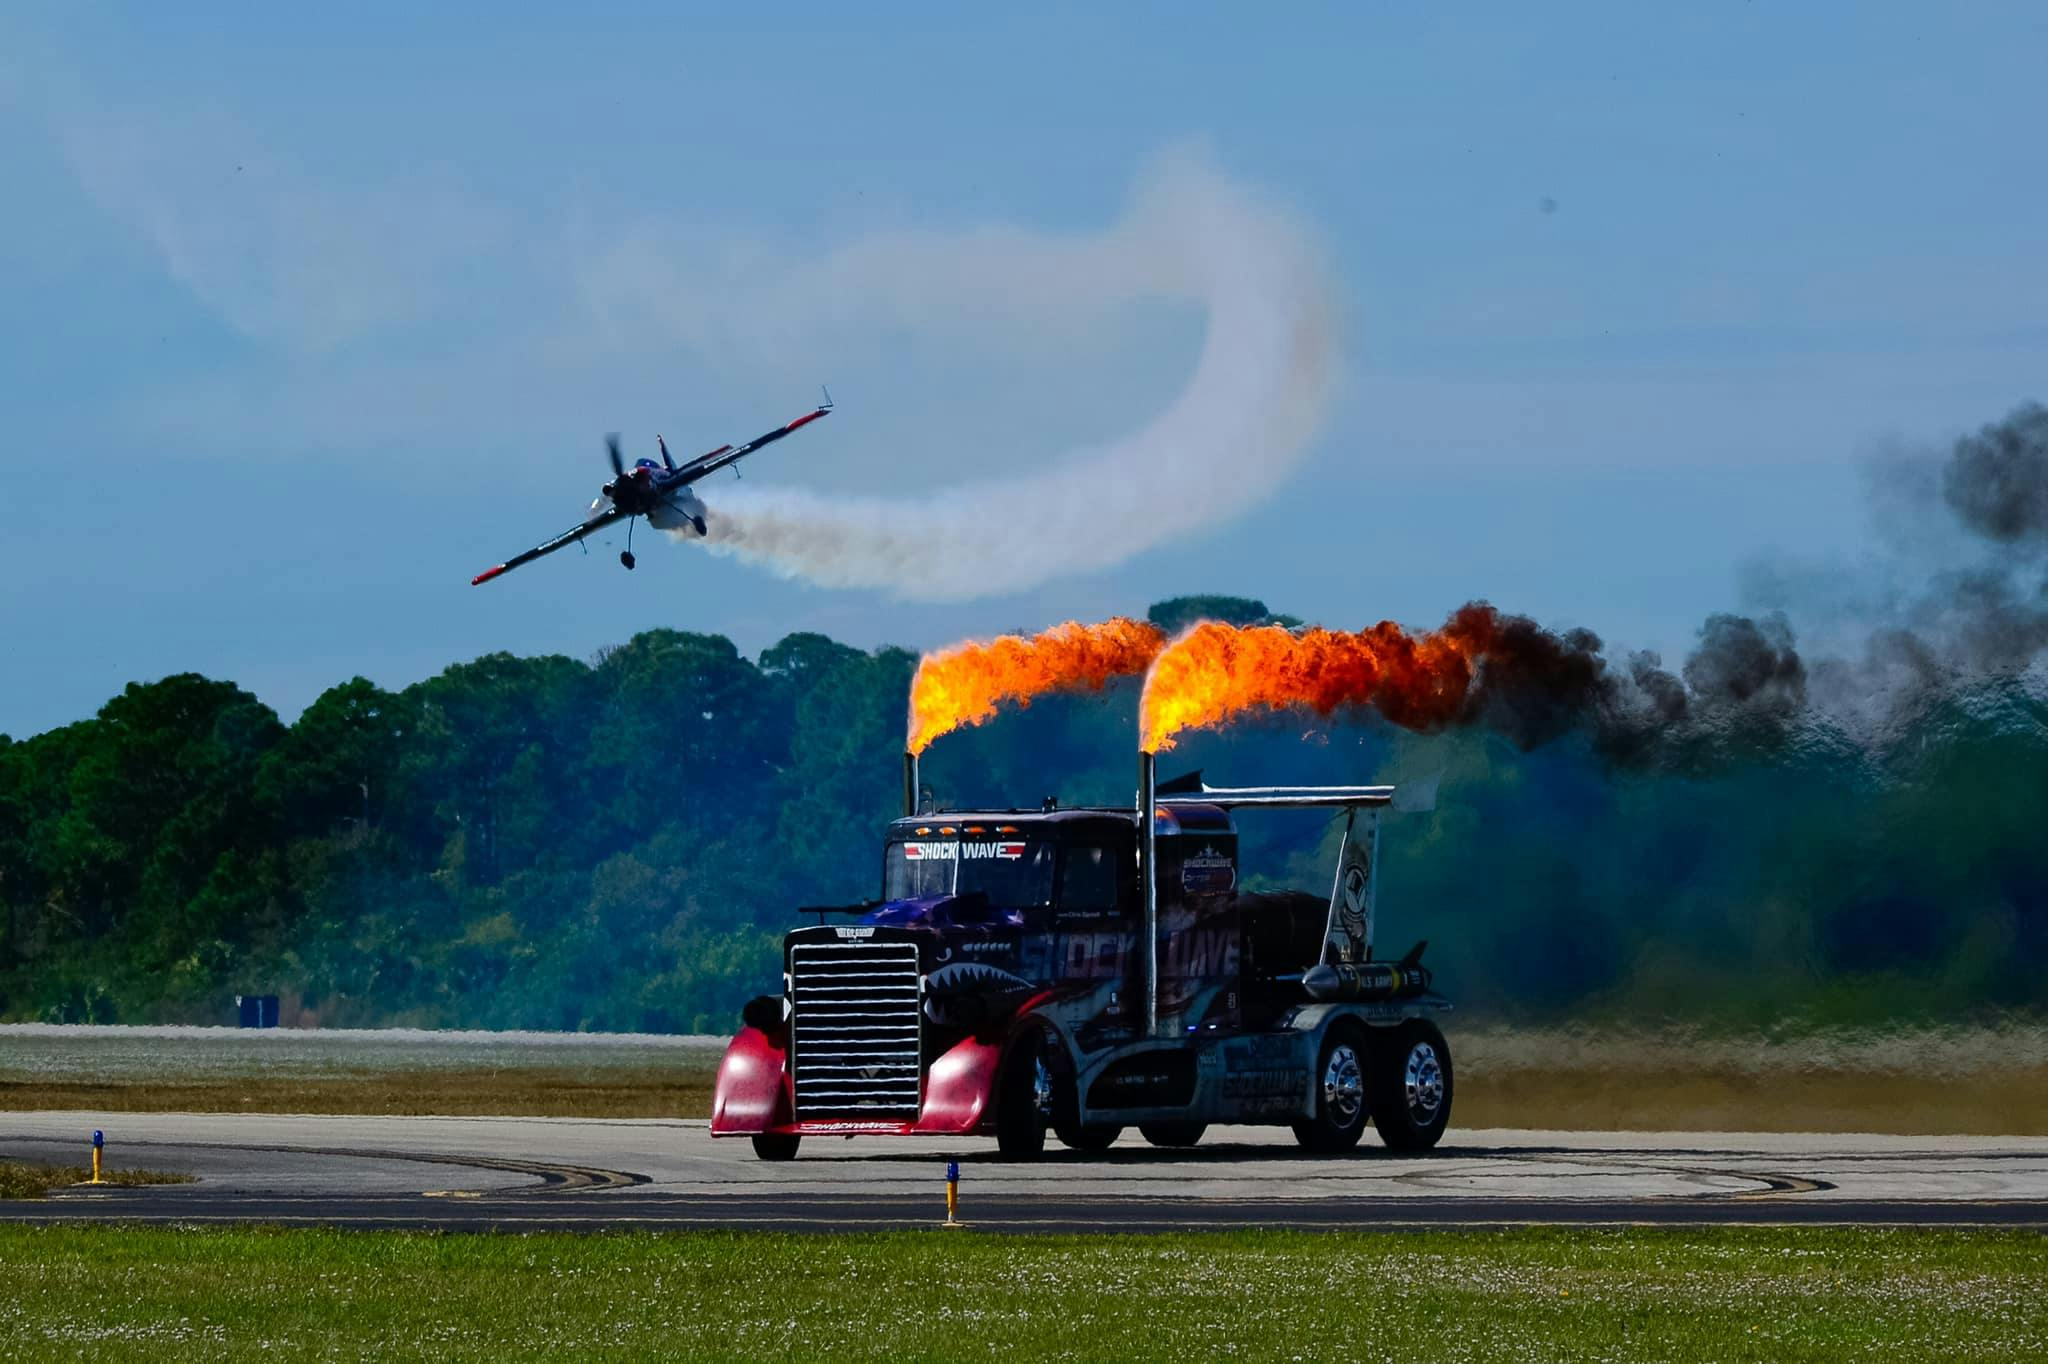 Shockwave Jet Truck fire smoke action air show